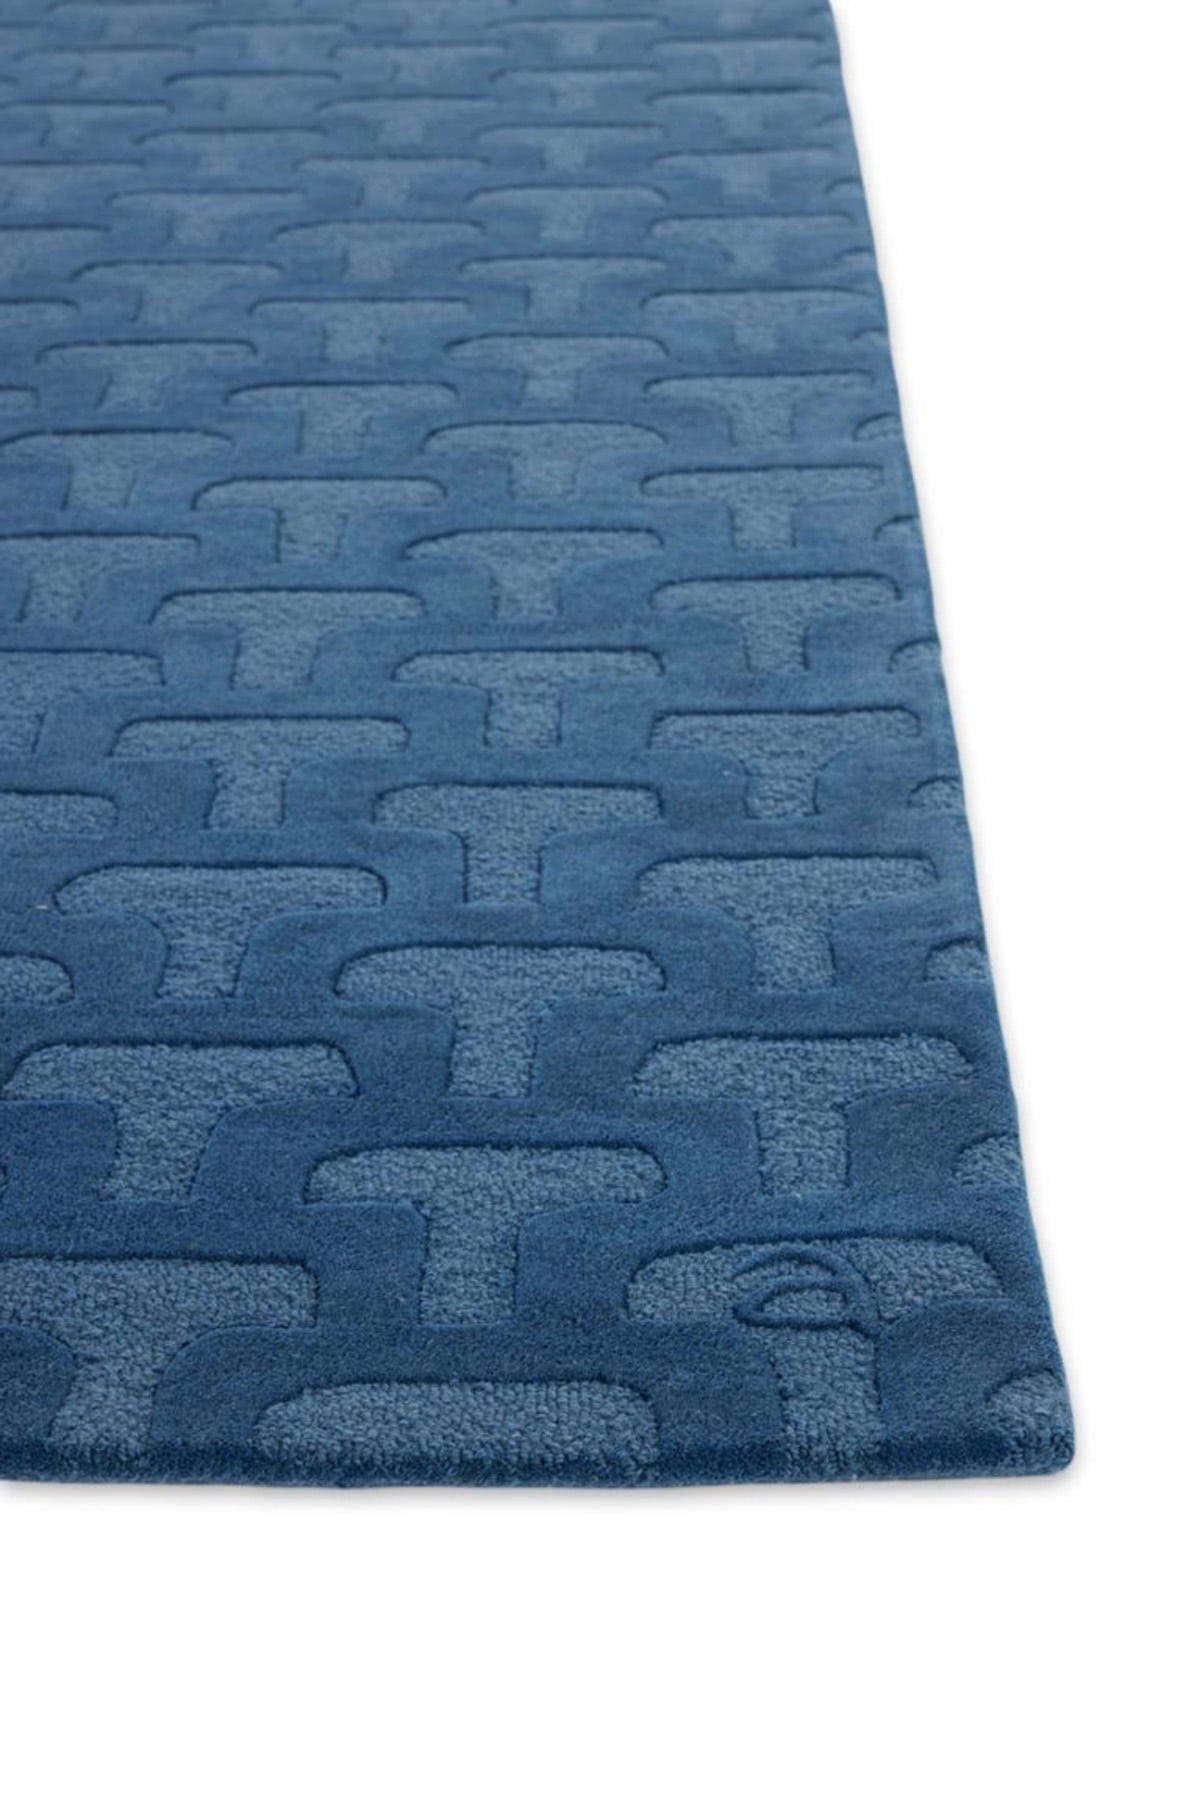 A detail corner of a deep blue textured, contemporary area rug called, Betty Blue by Angela Adams